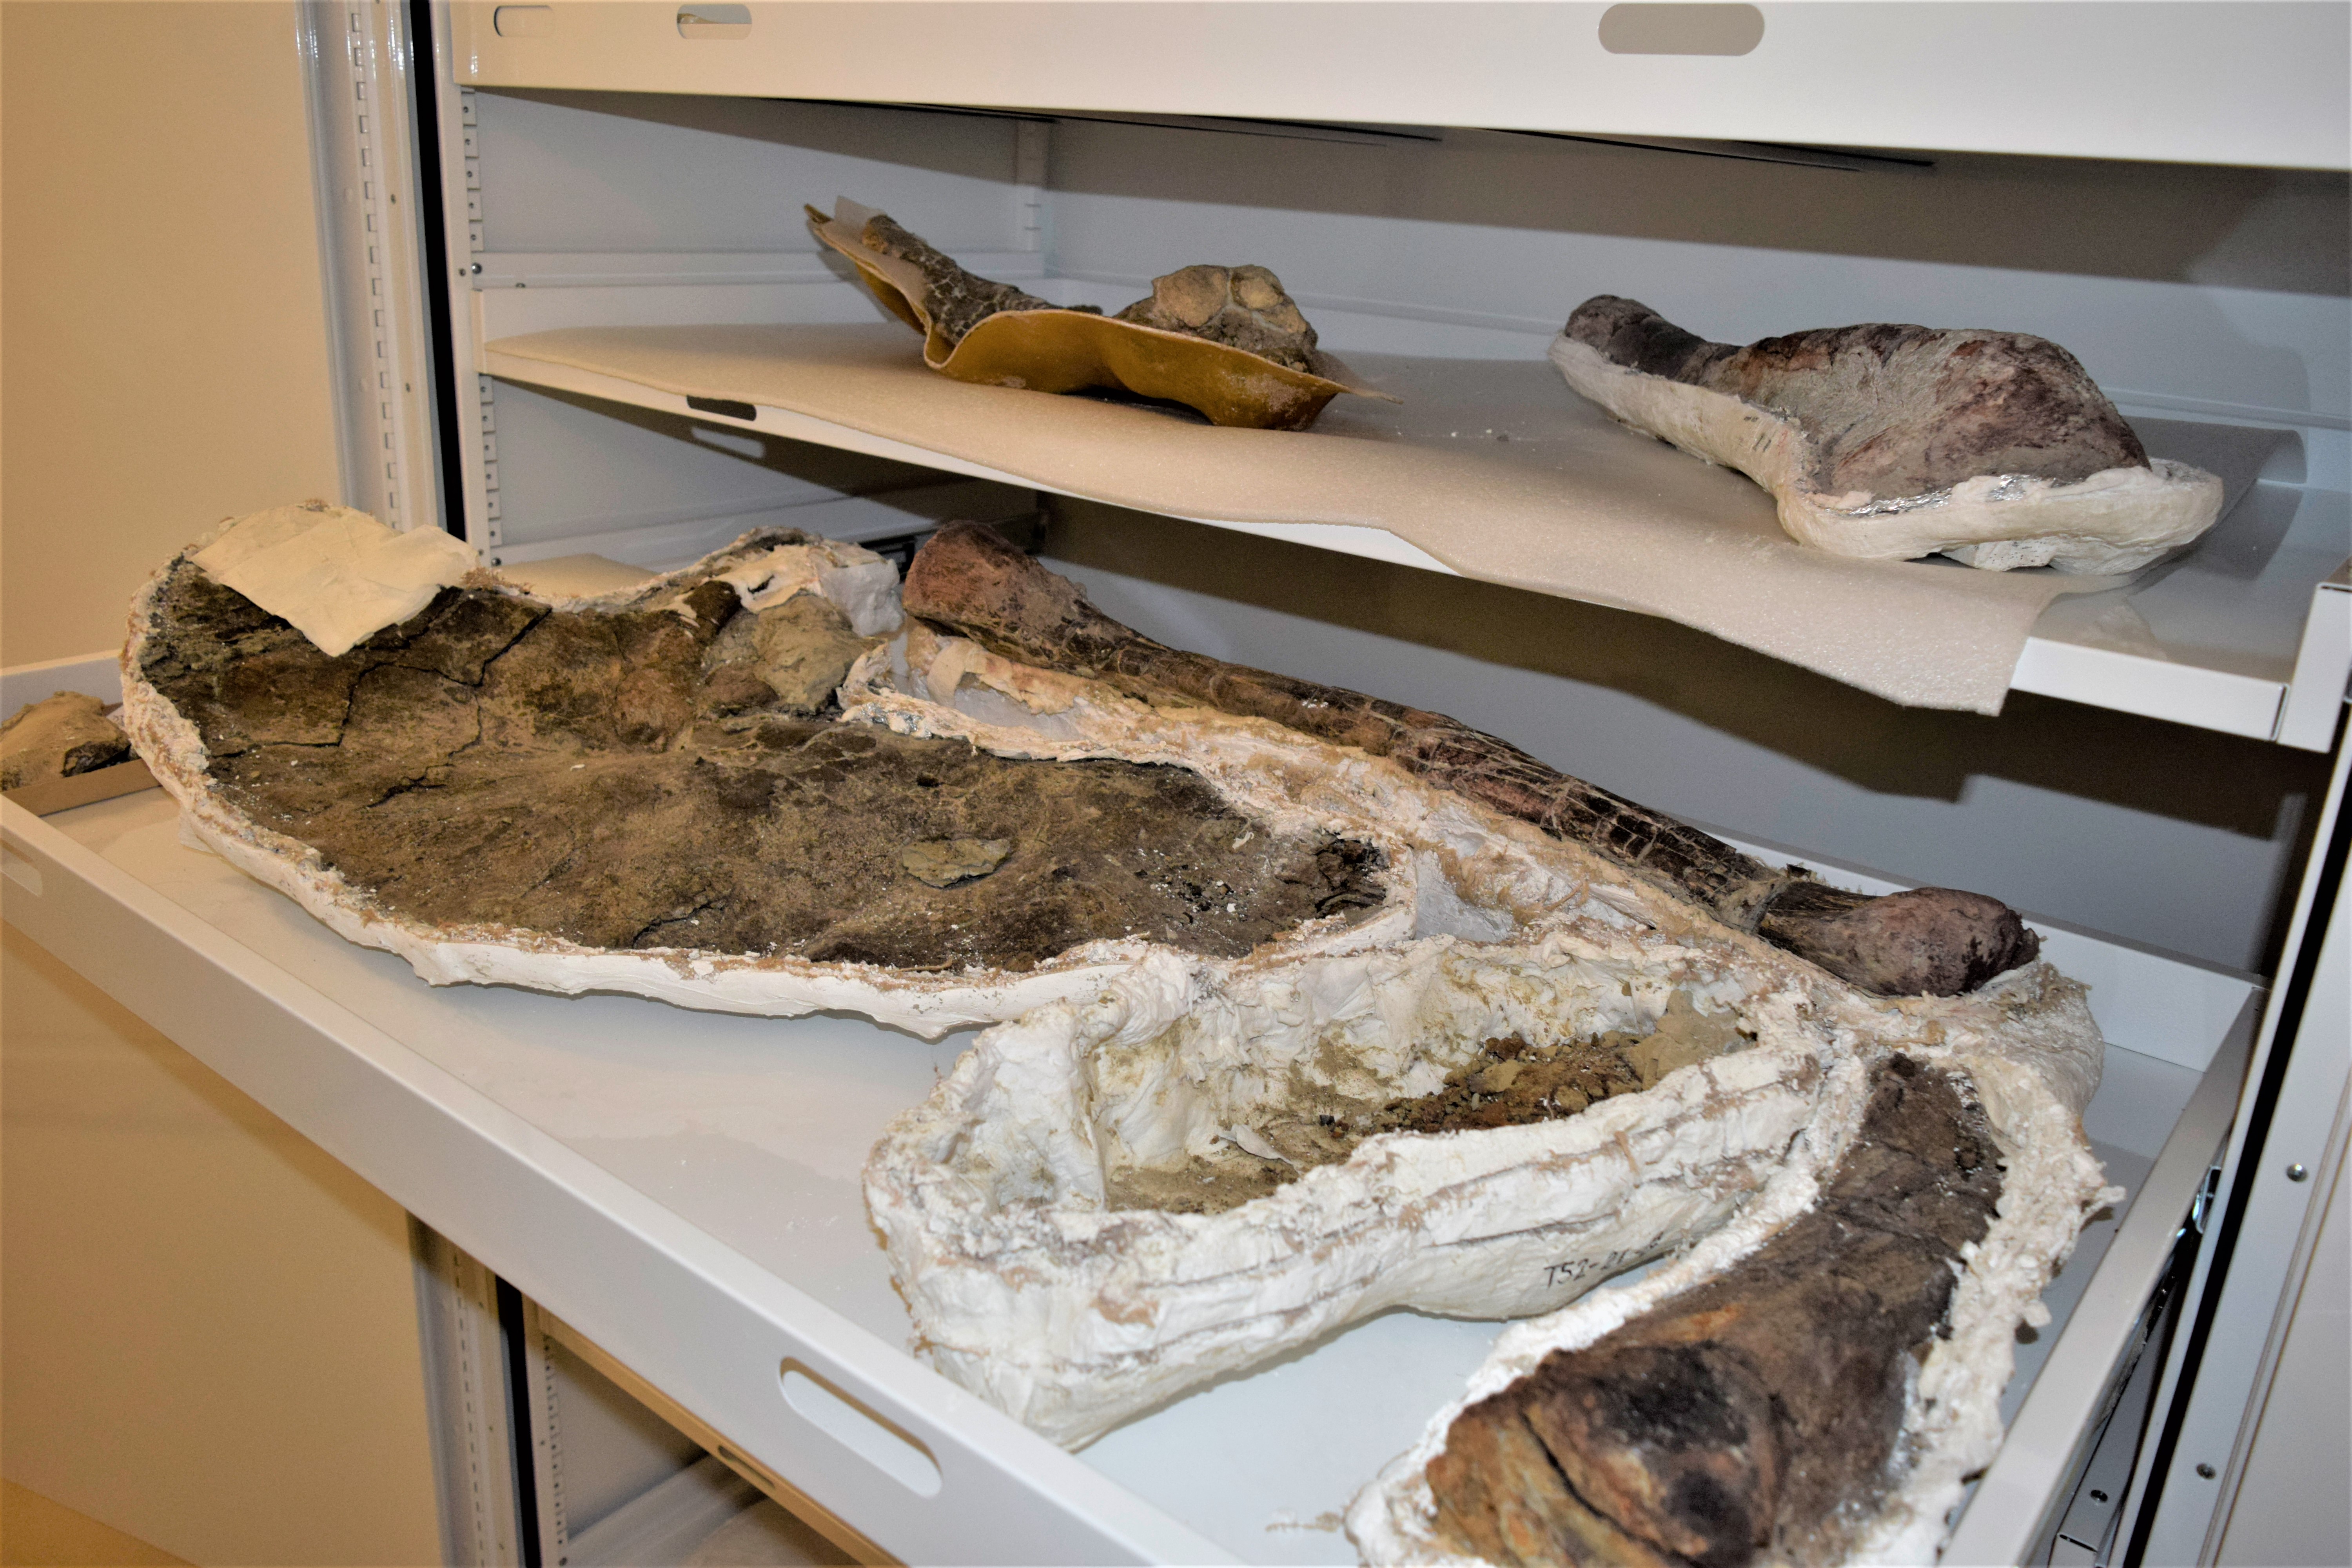 Sauropod limb and pelvic material collected from the “Two Sisters” series of localities